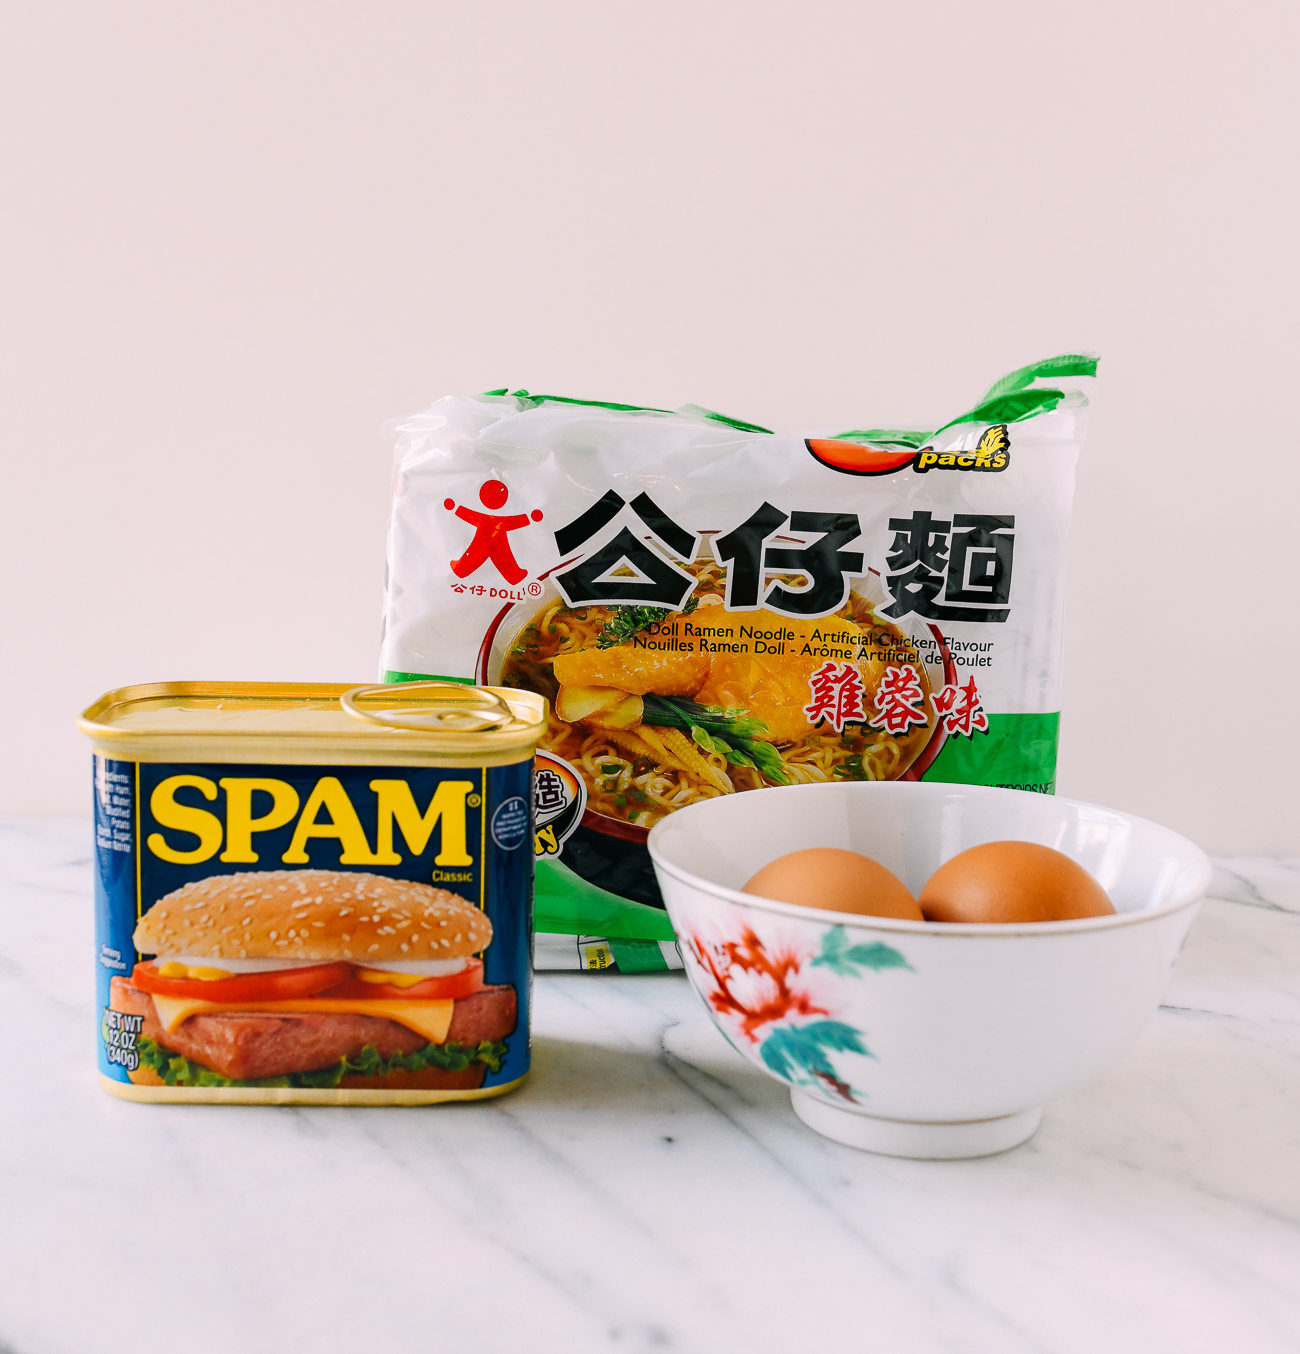 Ingredients for Hong Kong Instant Noodle Breakfast with Spam and Egg